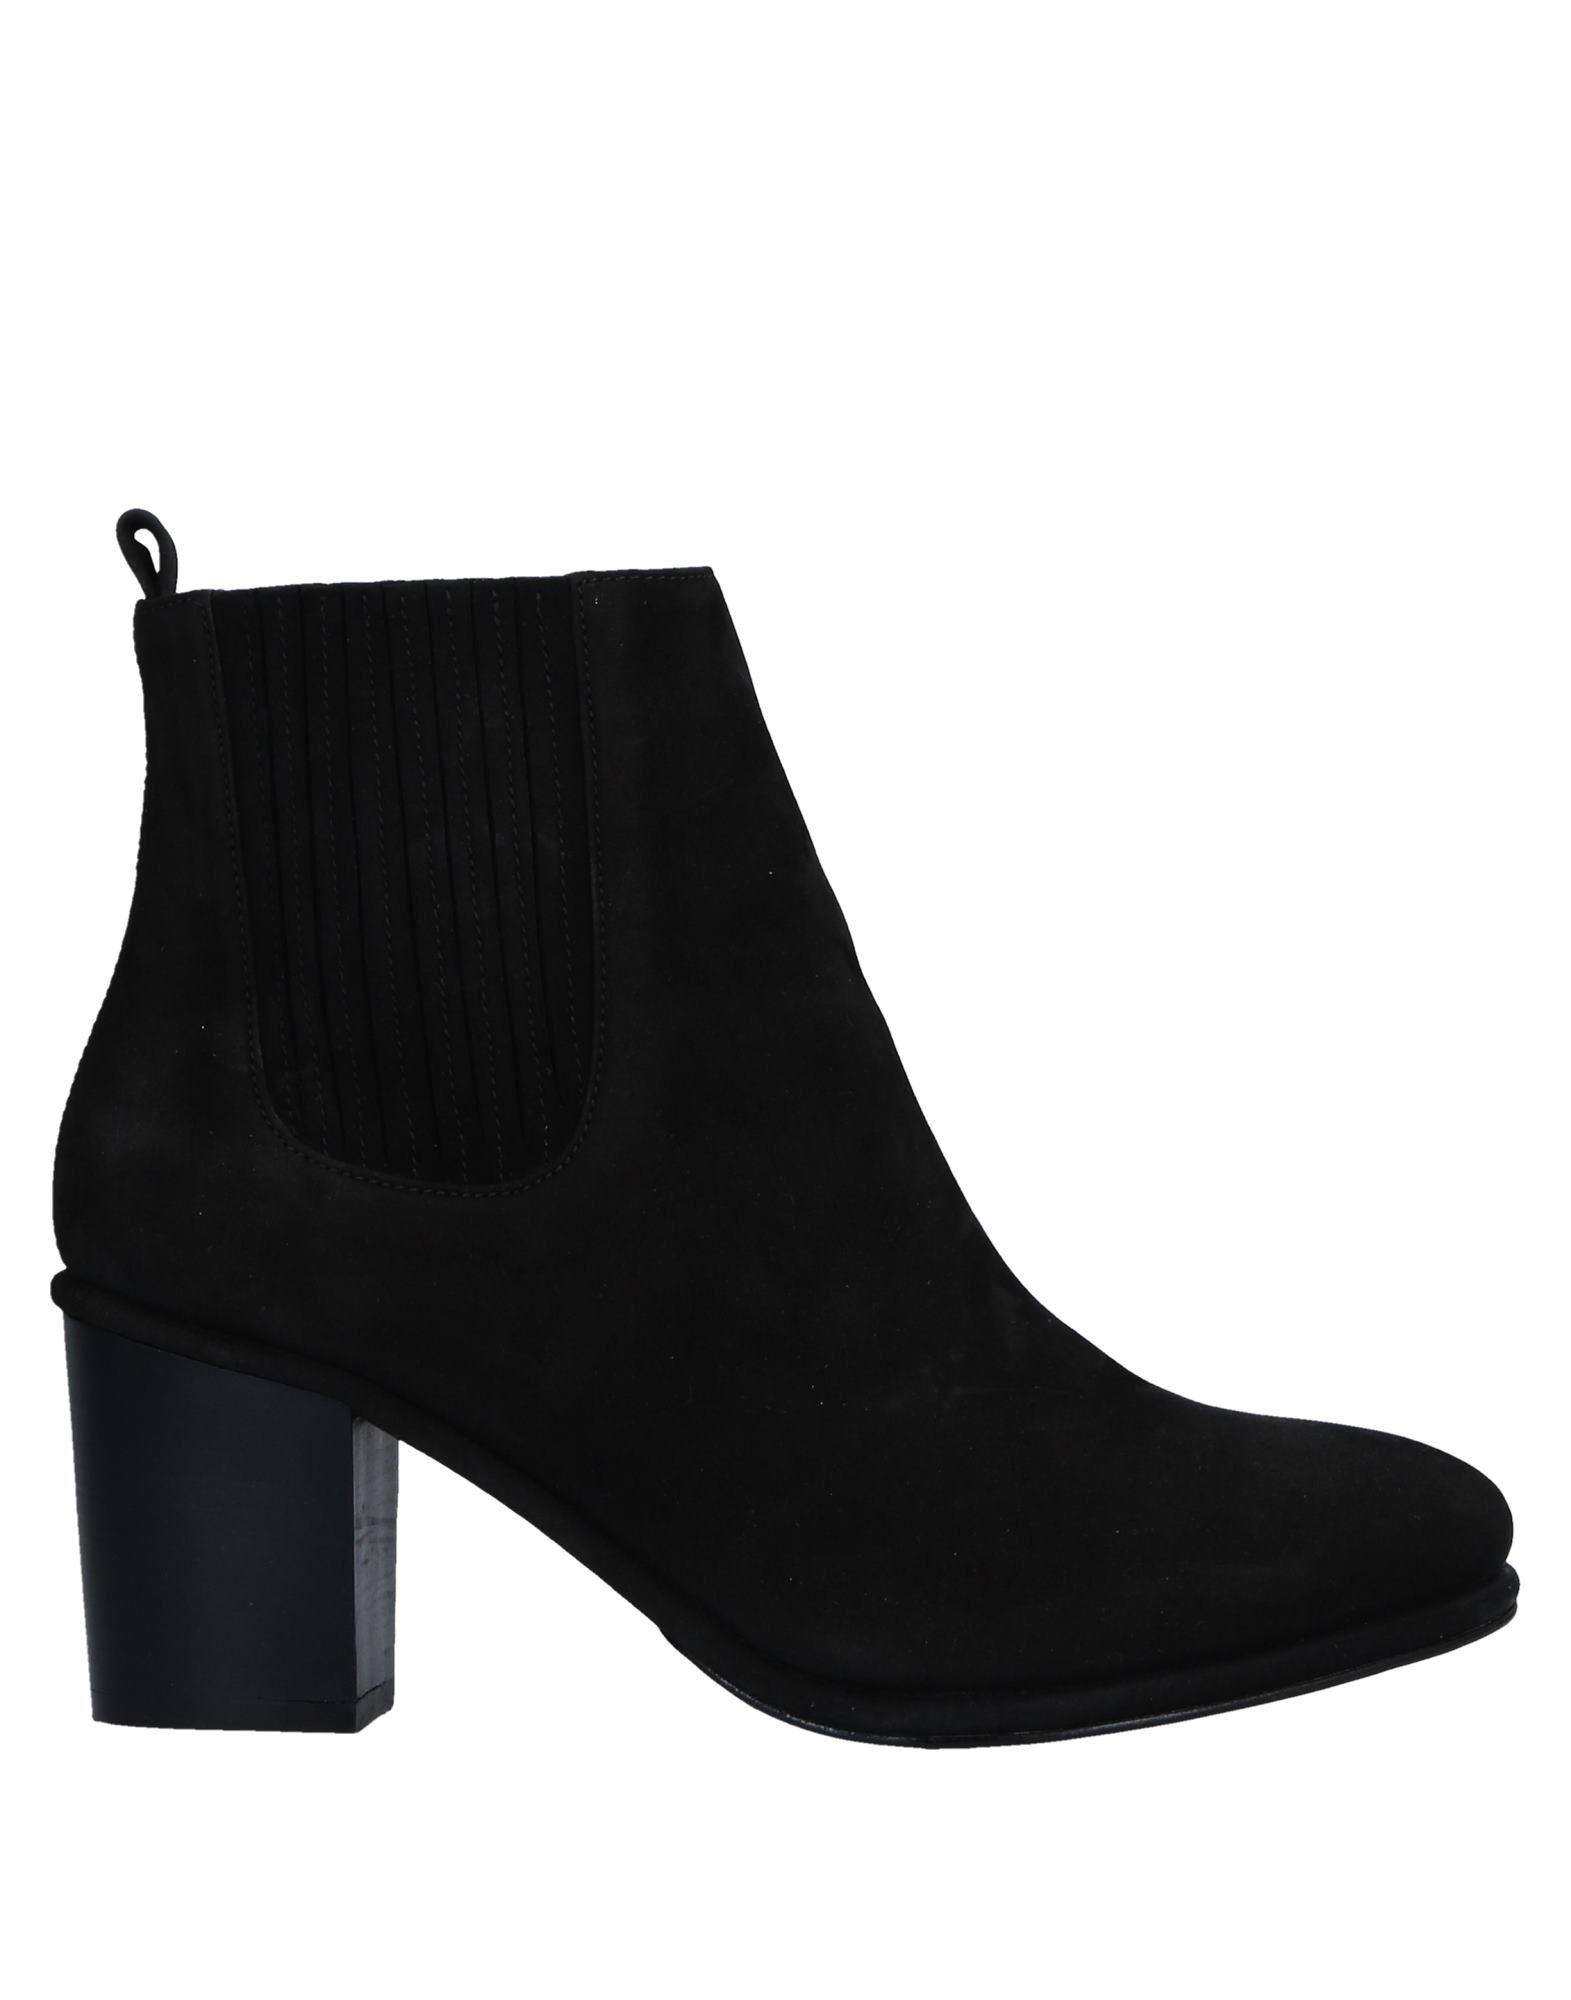 OPENING CEREMONY Ankle boot,11518934IV 13